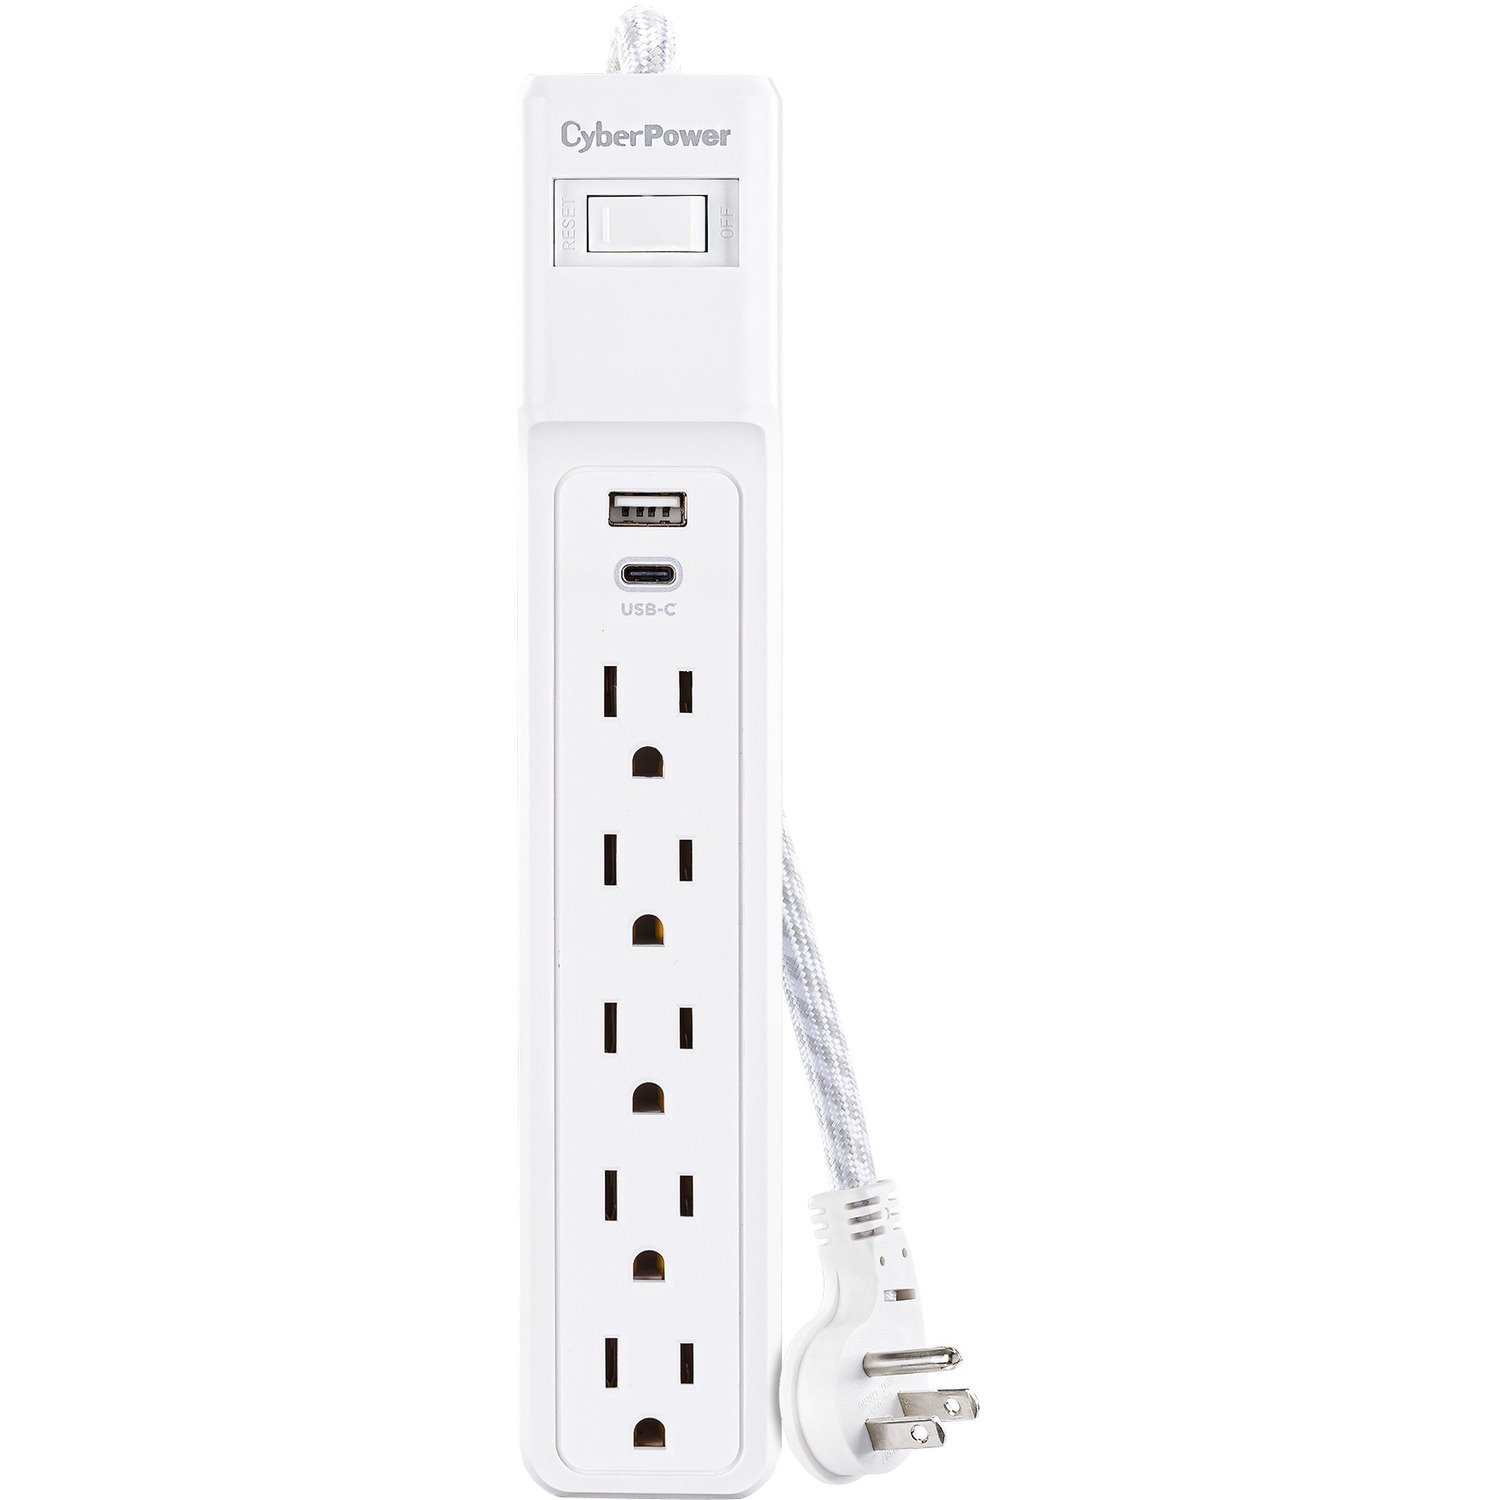 CyberPower P504UC Home Office 5 - Outlet Surge Protector with 500 J Surge Suppression